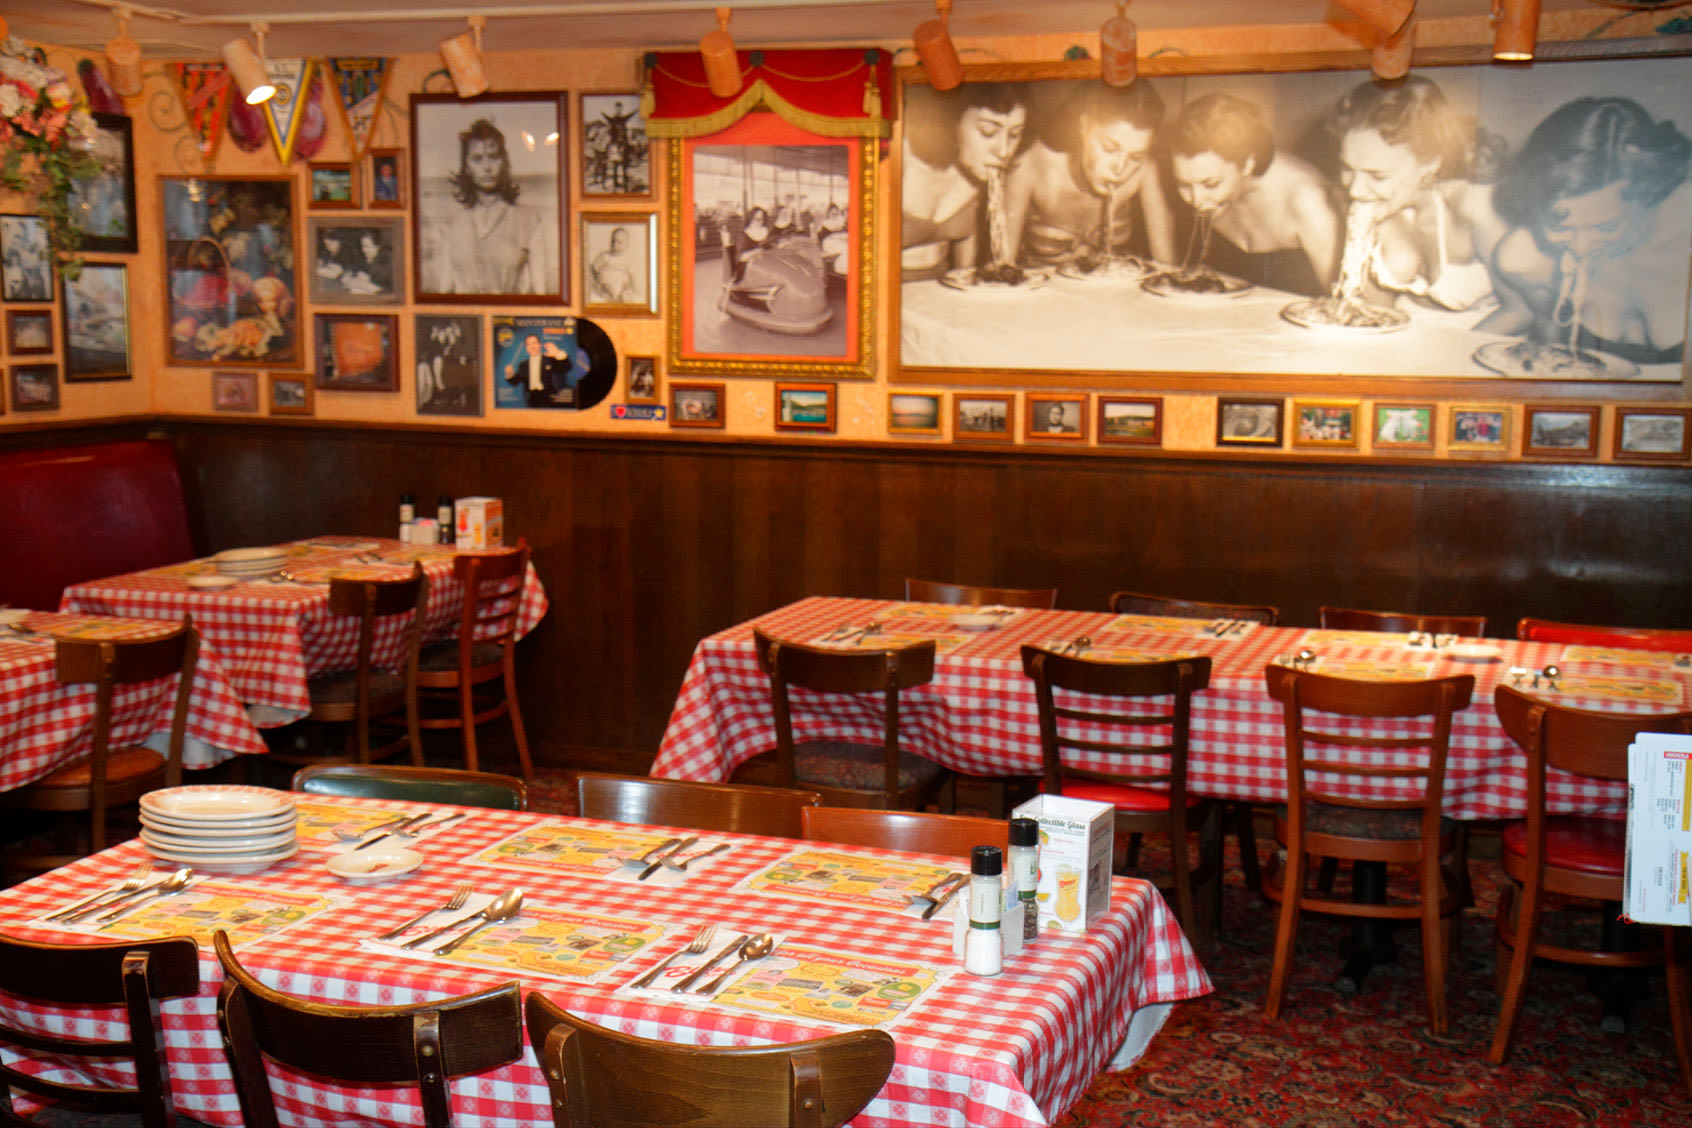 Buca di Beppo has abruptly shut down 13 underperforming restaurant locations nationwide